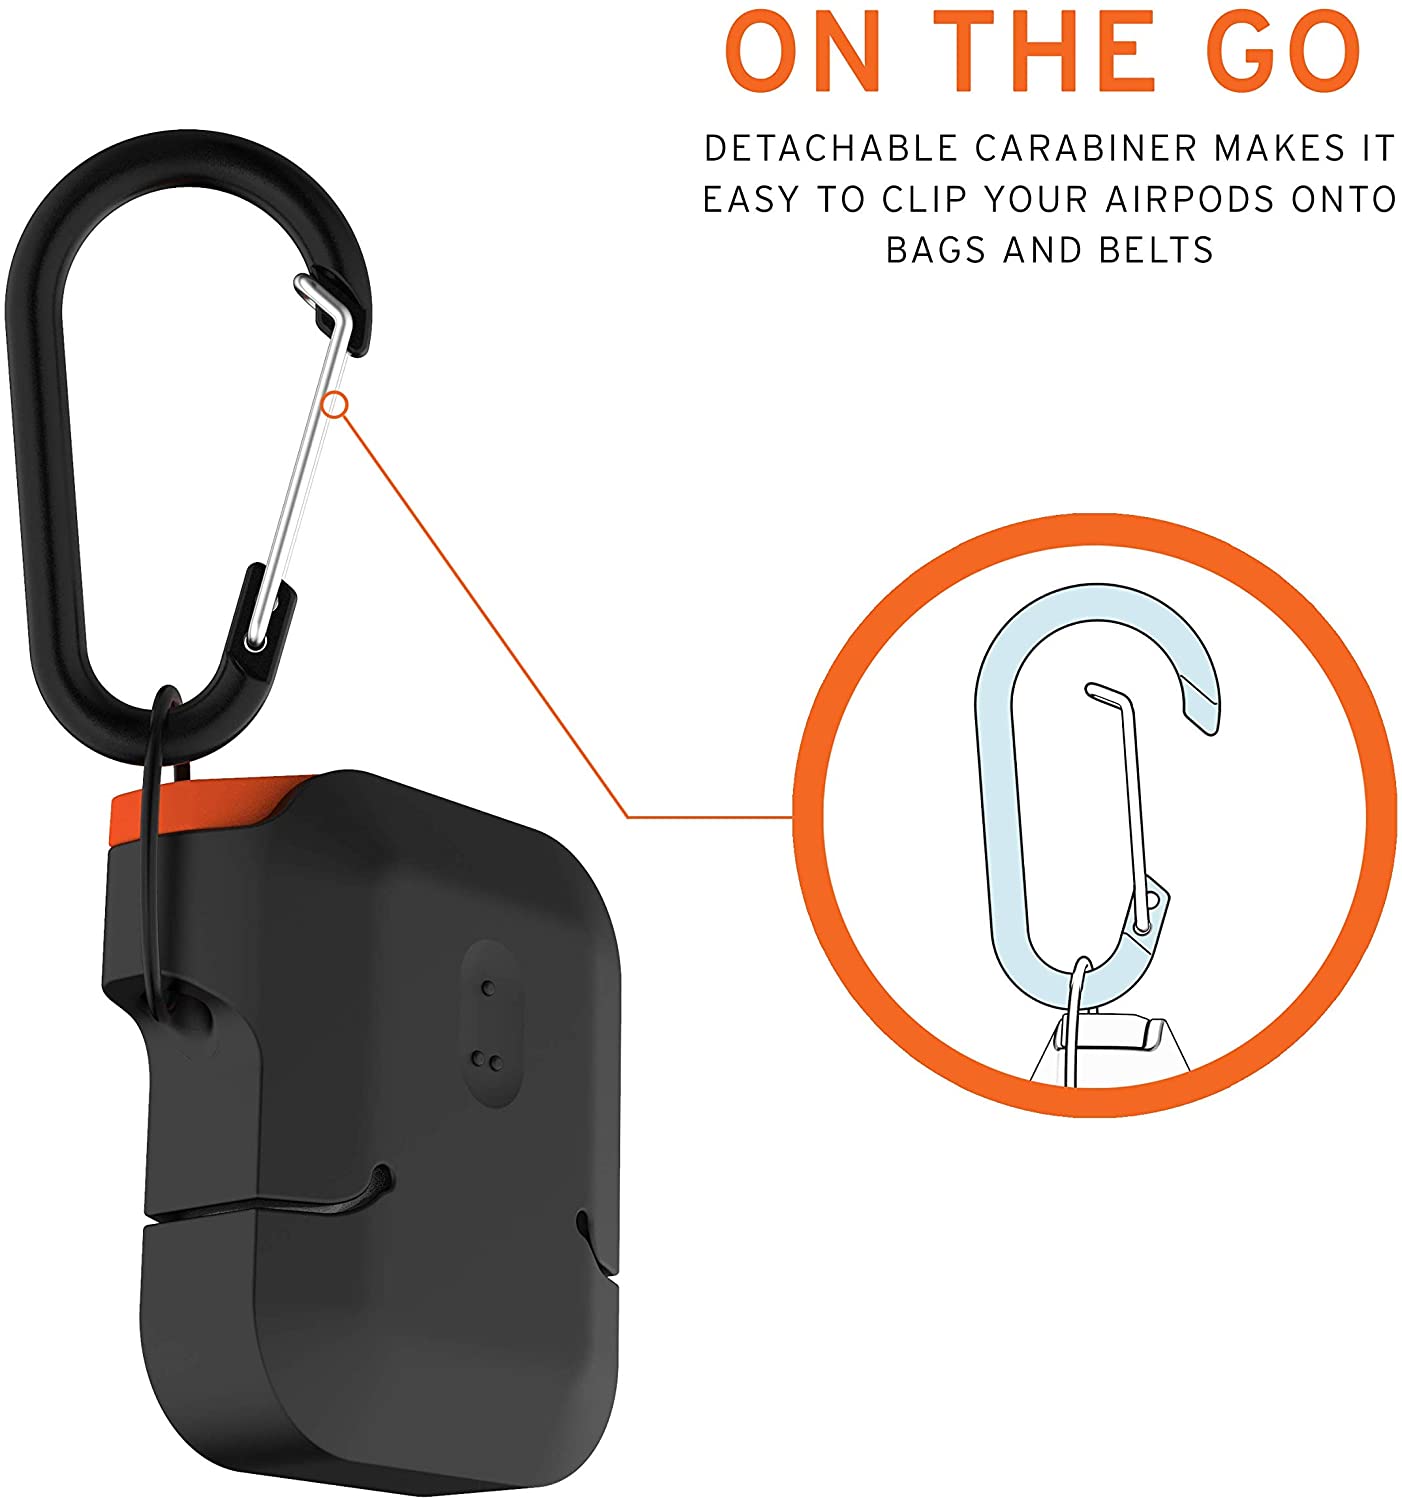 UAG Silicone AirPods (1st Gen & 2nd Gen) Full-Body Protective Rugged Water Resistant Soft-Touch Silicone Case with Detachable Carabiner